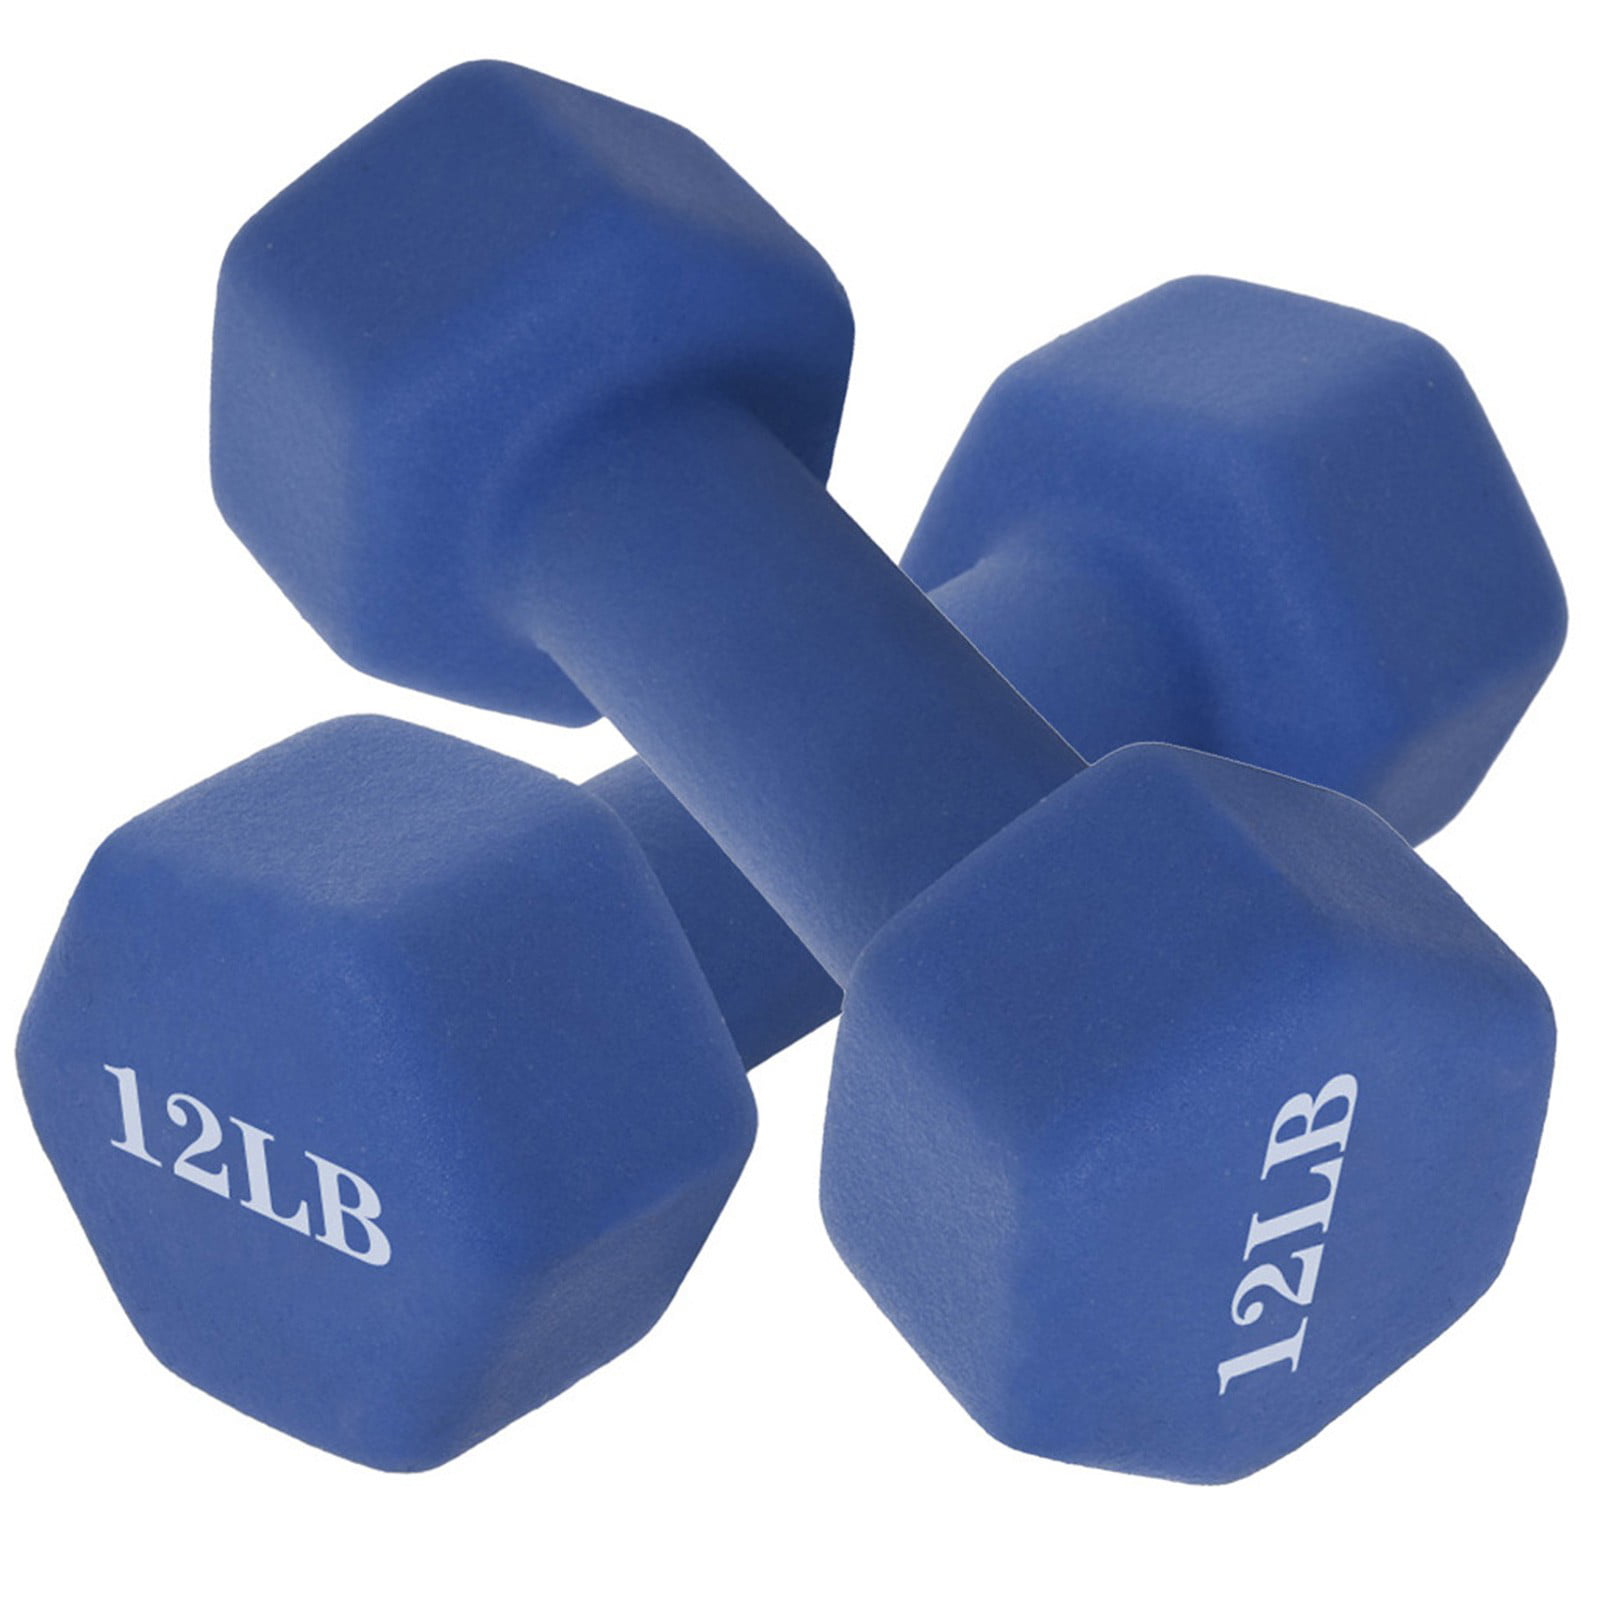 Details about   Totall 88 LB Weight Dumbbell Set Pro Gym Barbell Plates Body Workout Adjustable 